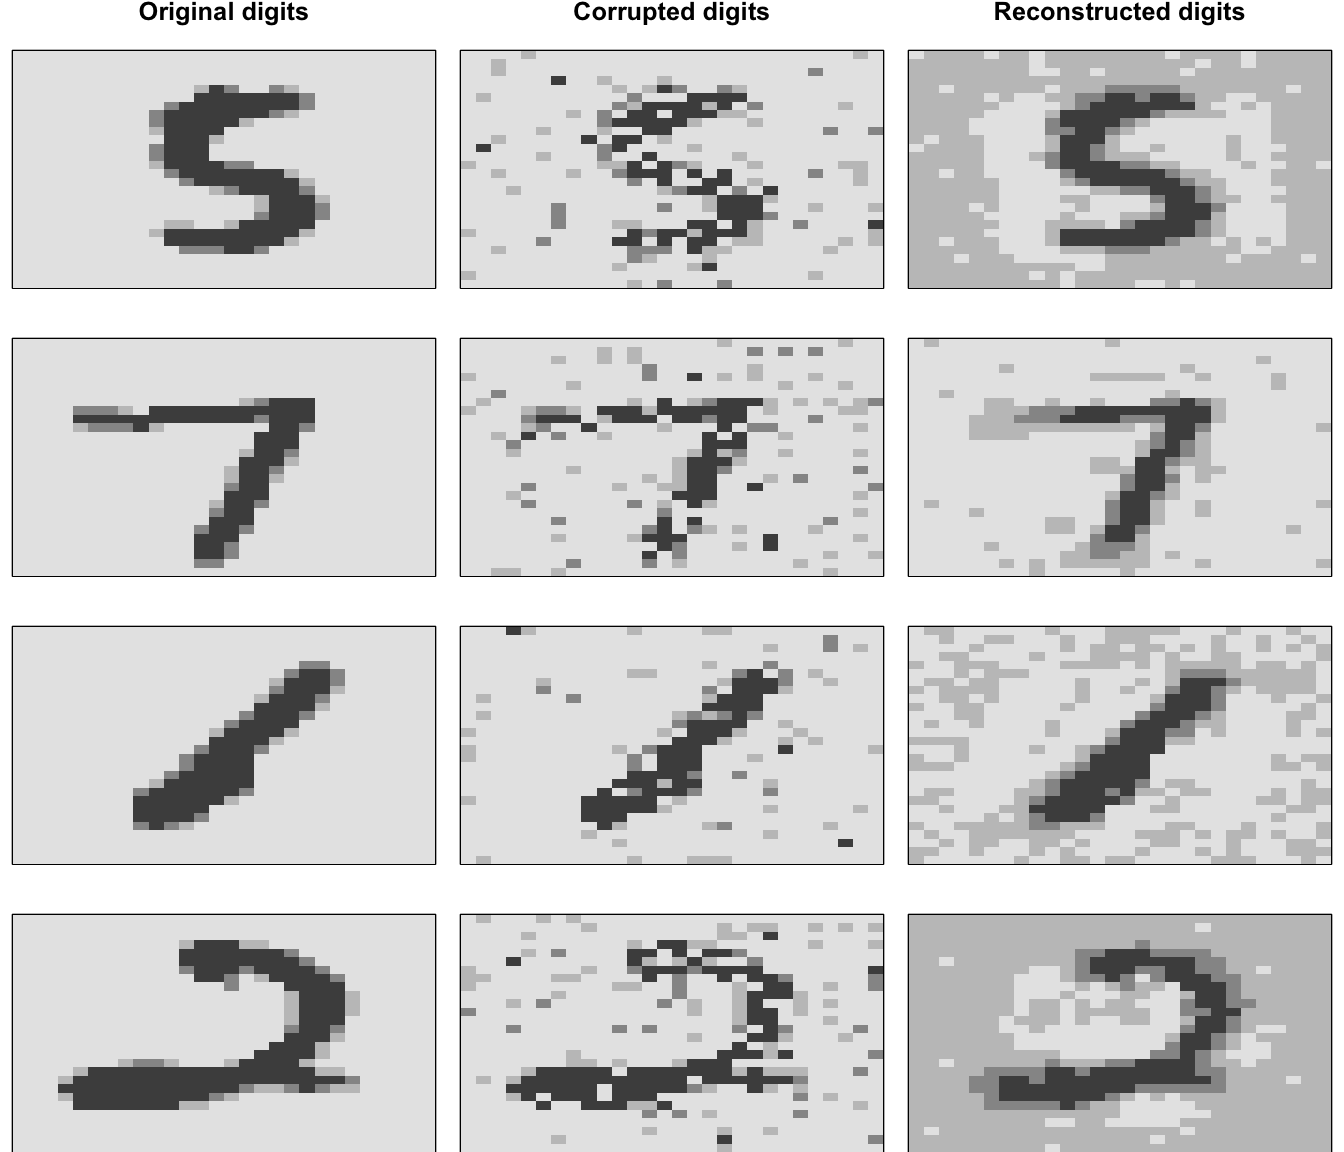 Original digits sampled from the MNIST test set (left), corrupted input digits (middle), and reconstructed outputs (right).